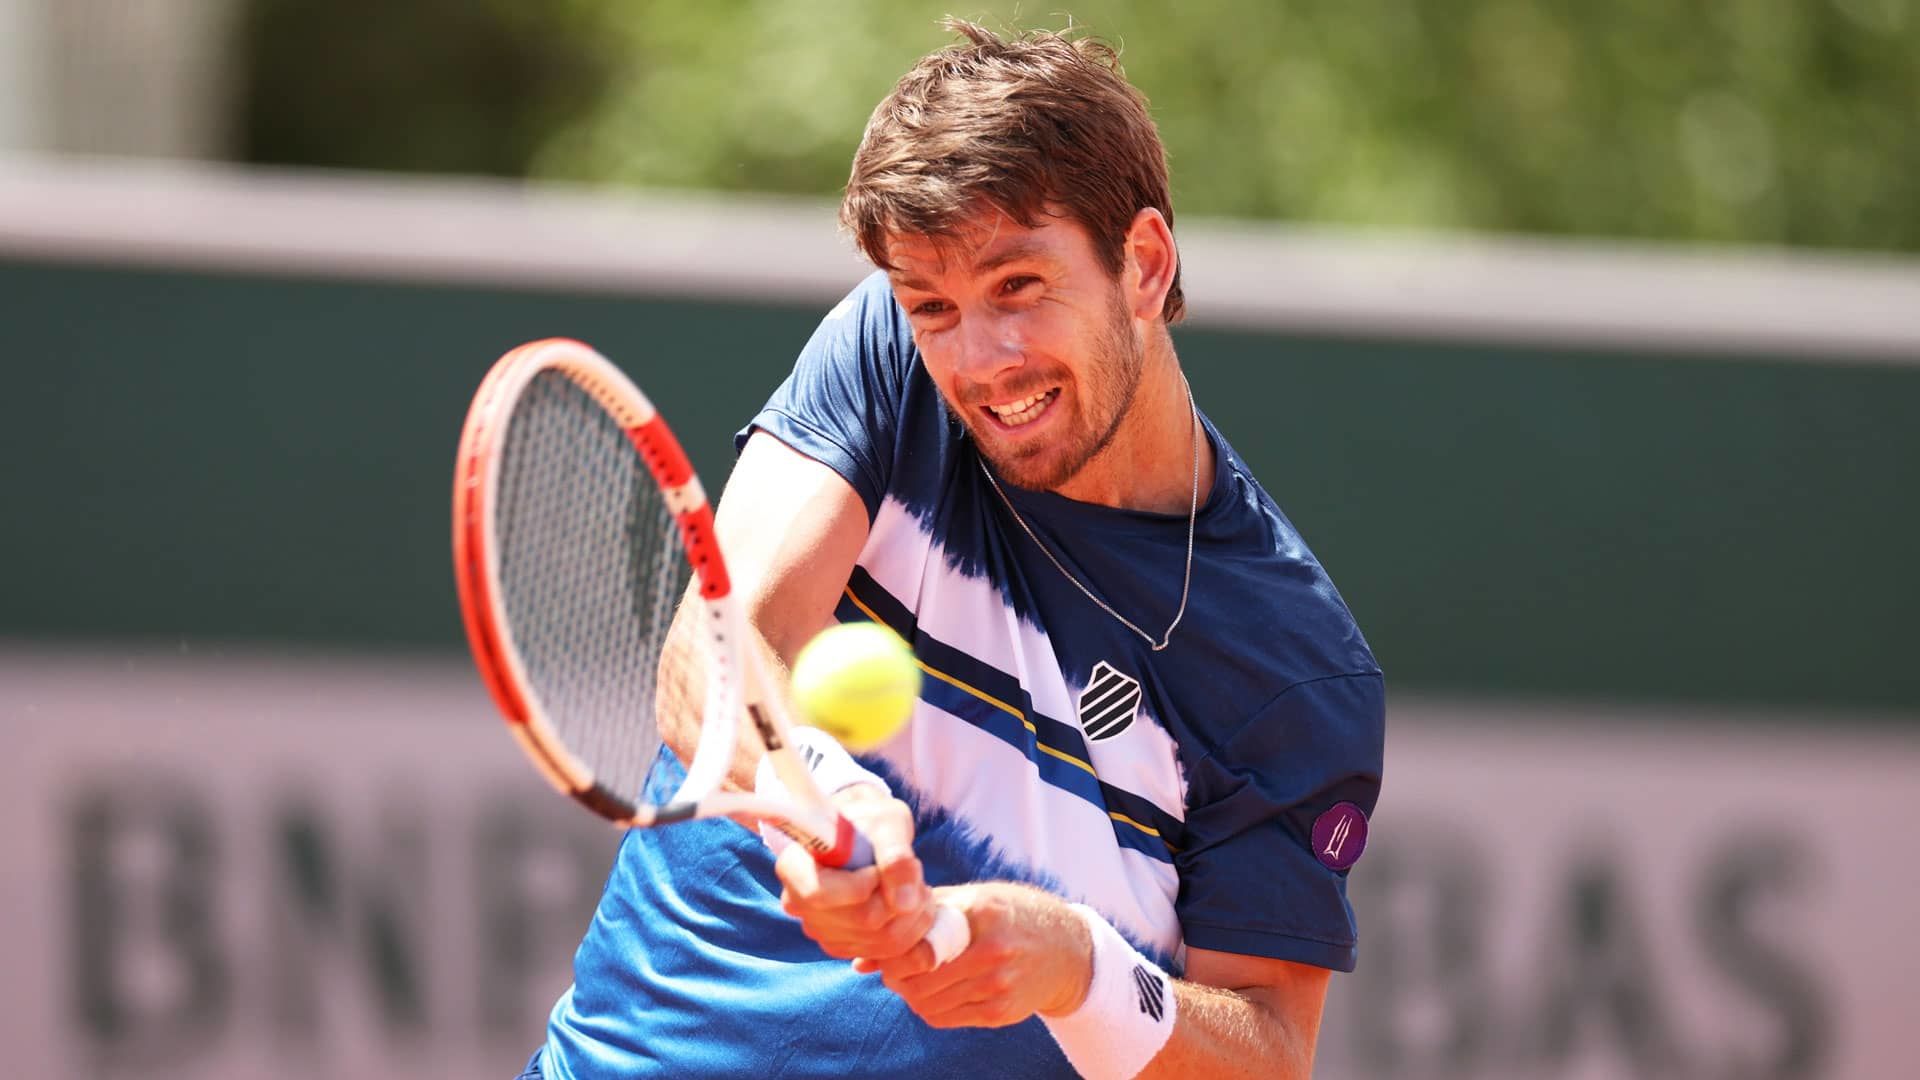 Cameron Norrie vs Steve Johnson Prediction, Betting Tips and Odds | 01 July 2022